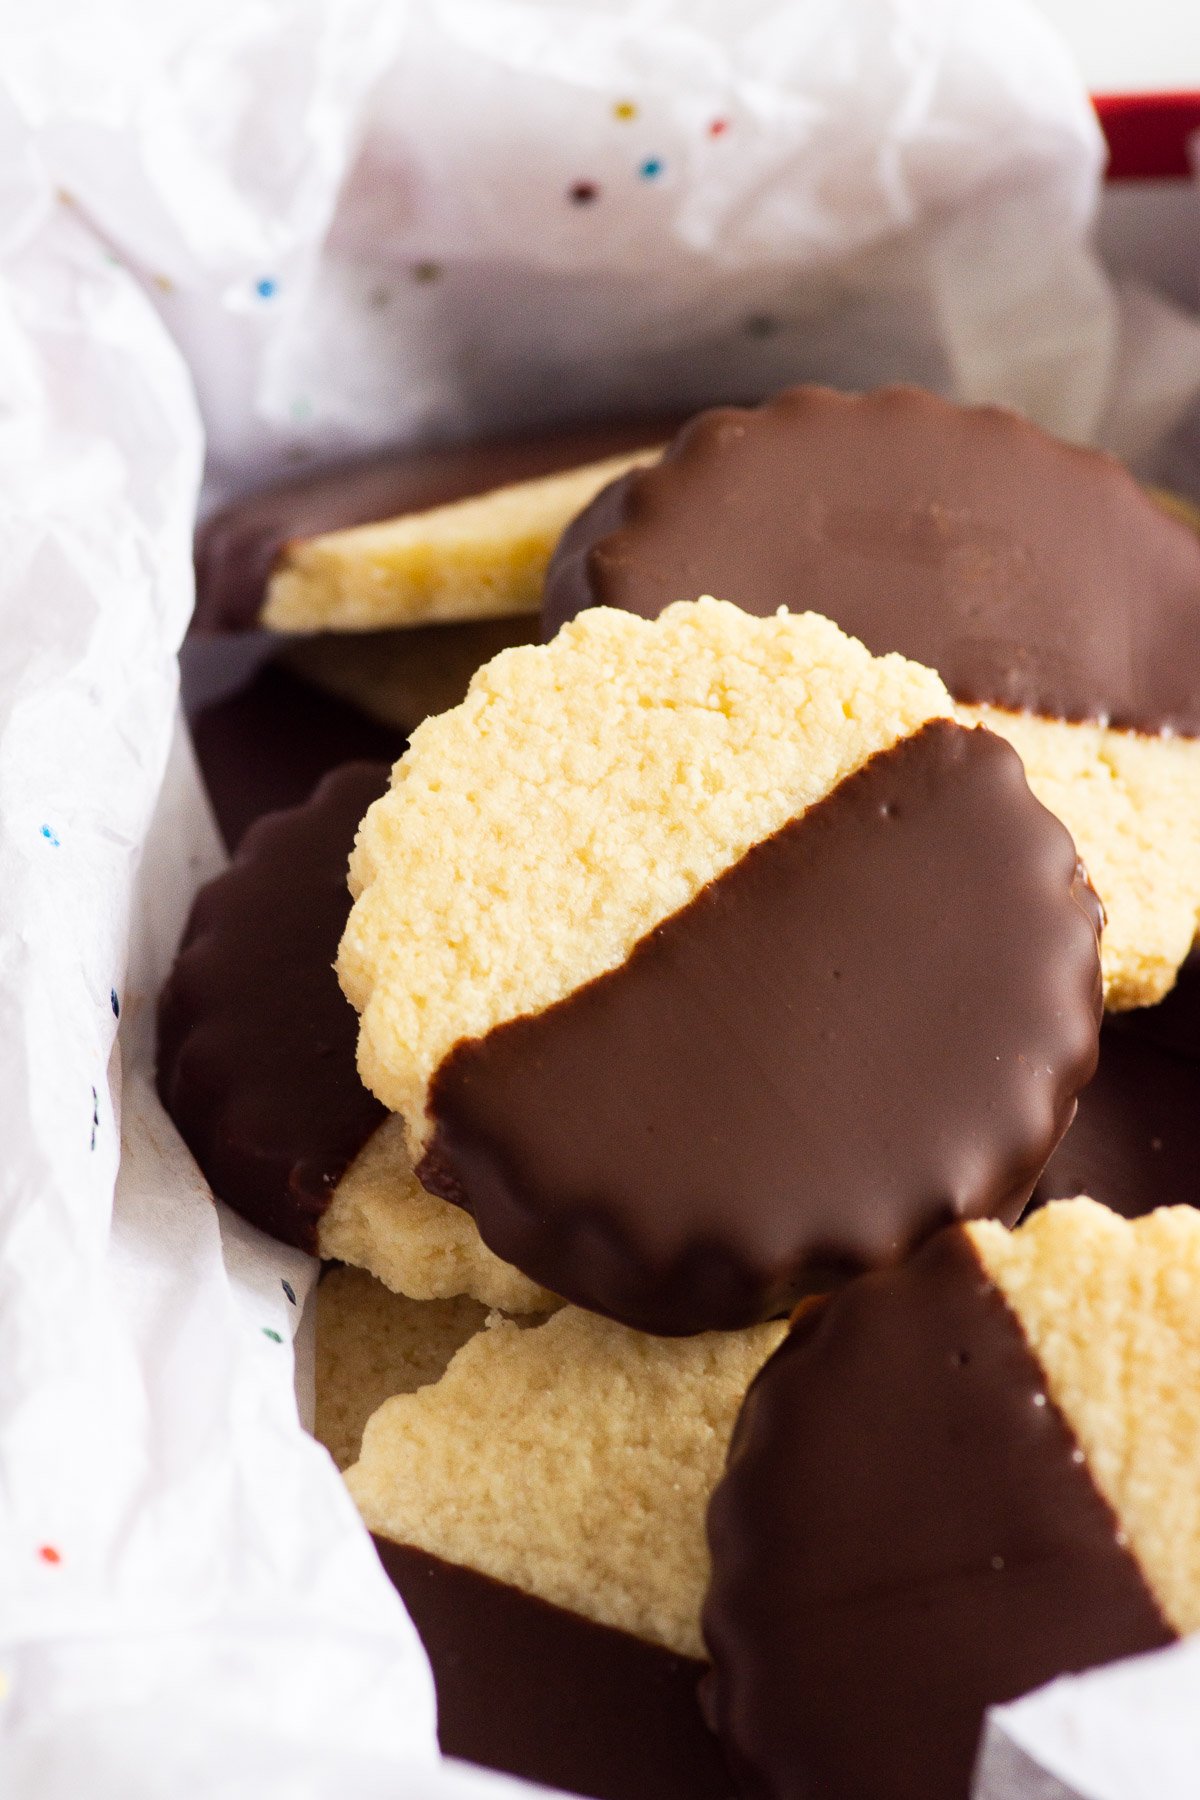 Almond flour shortbread cookies dipped in chocolate.